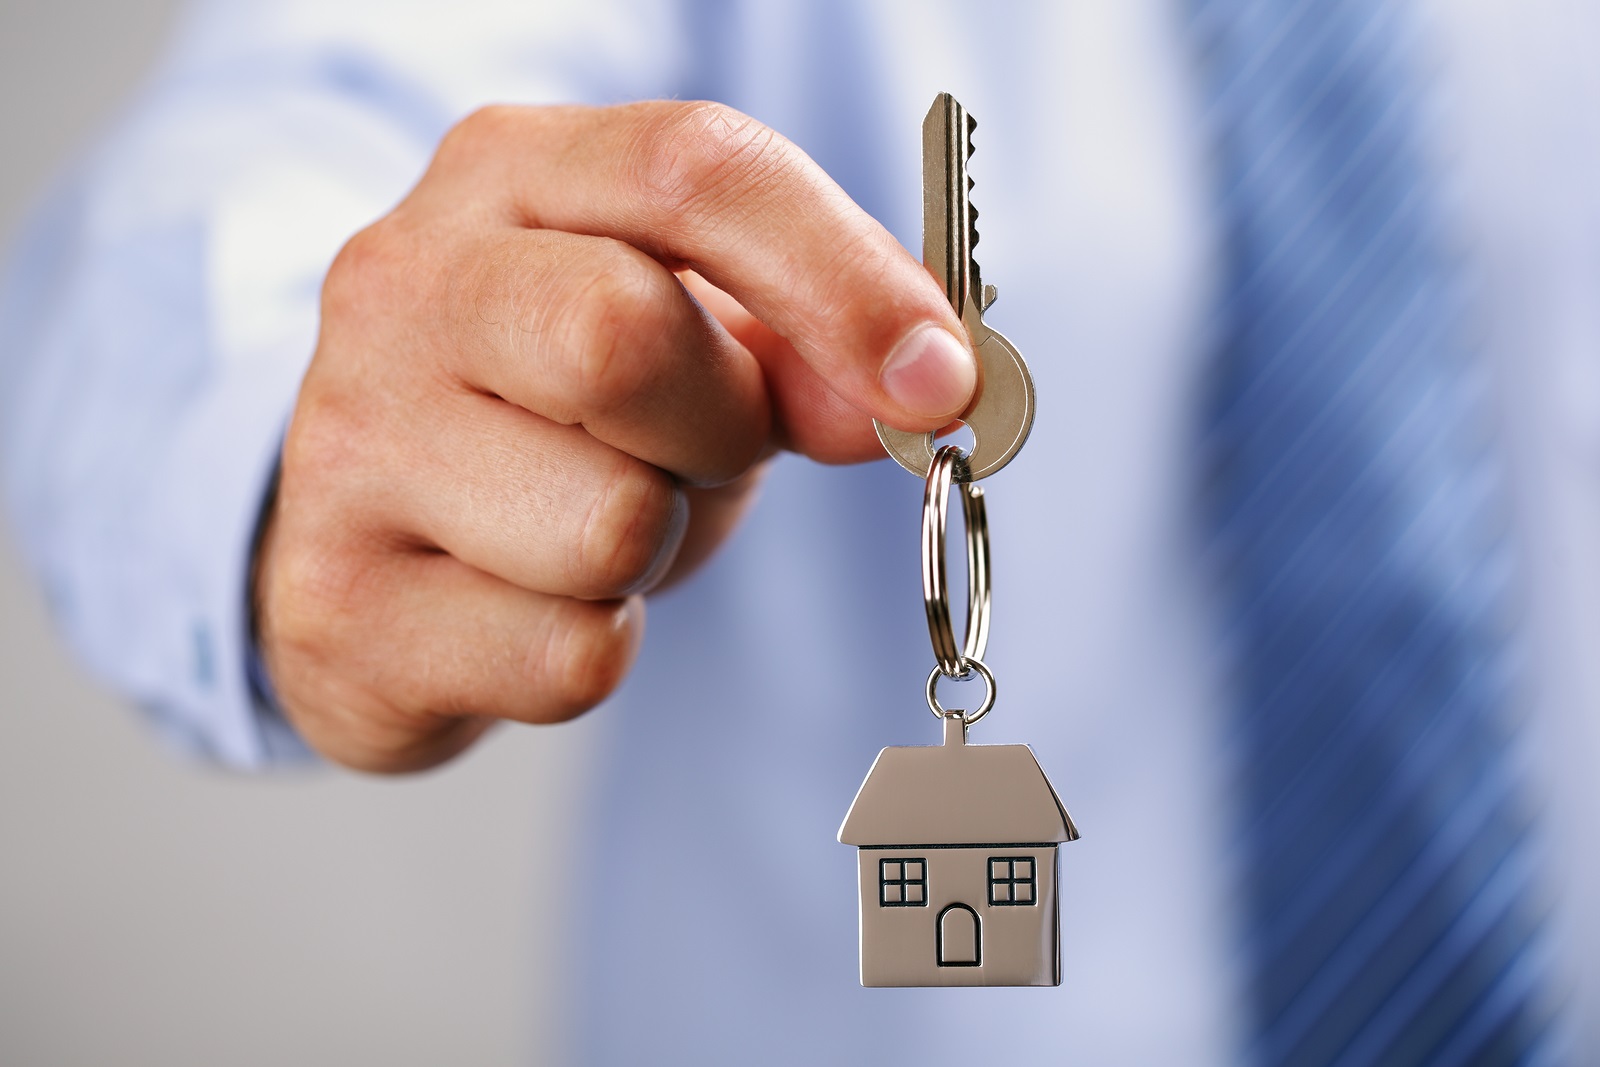 A Guide For Investing in Rental Property